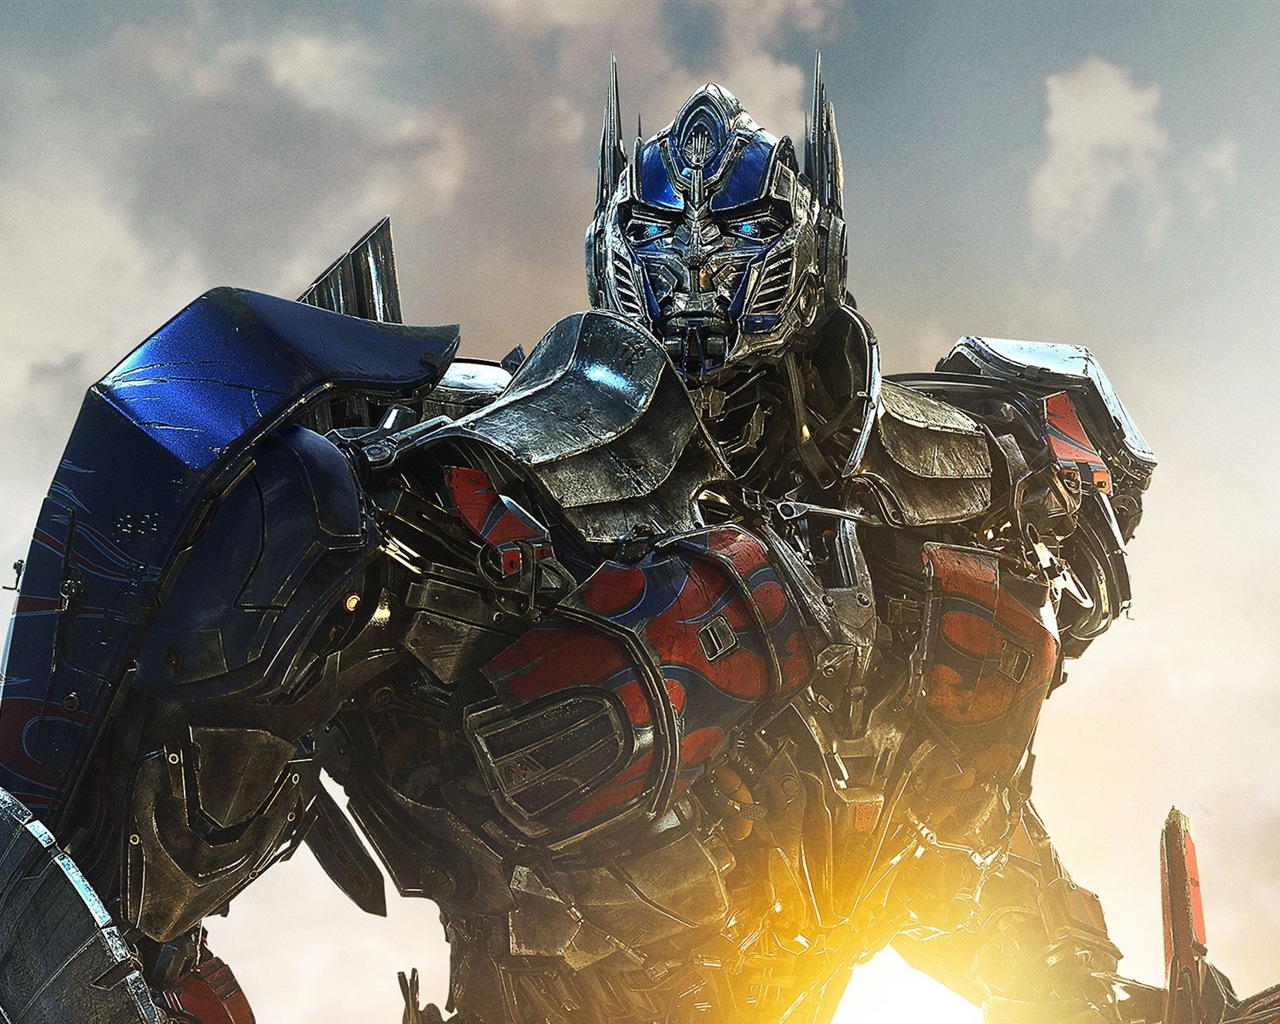 2014 Transformers: Age of Extinction HD wallpapers #2 - 1280x1024